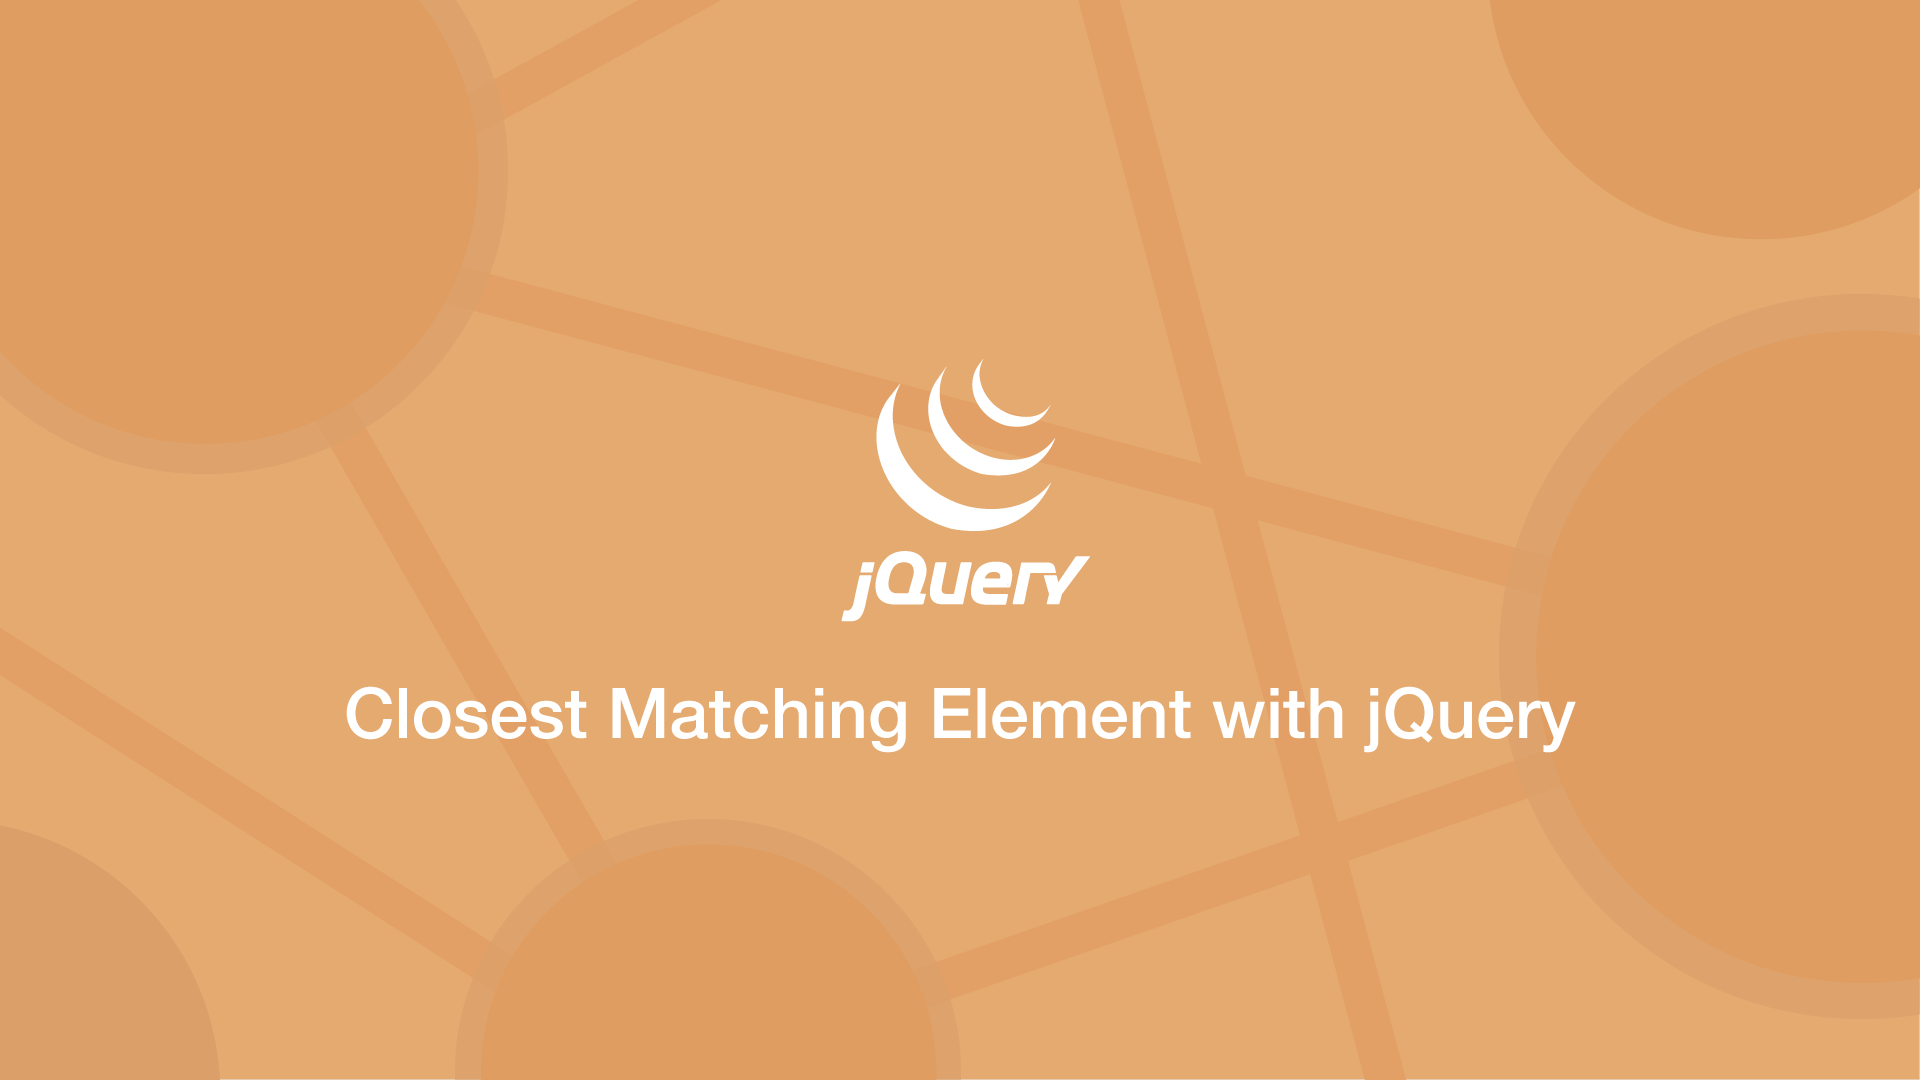 How to get the Closest Matching Element with jQuery   SkillSugar